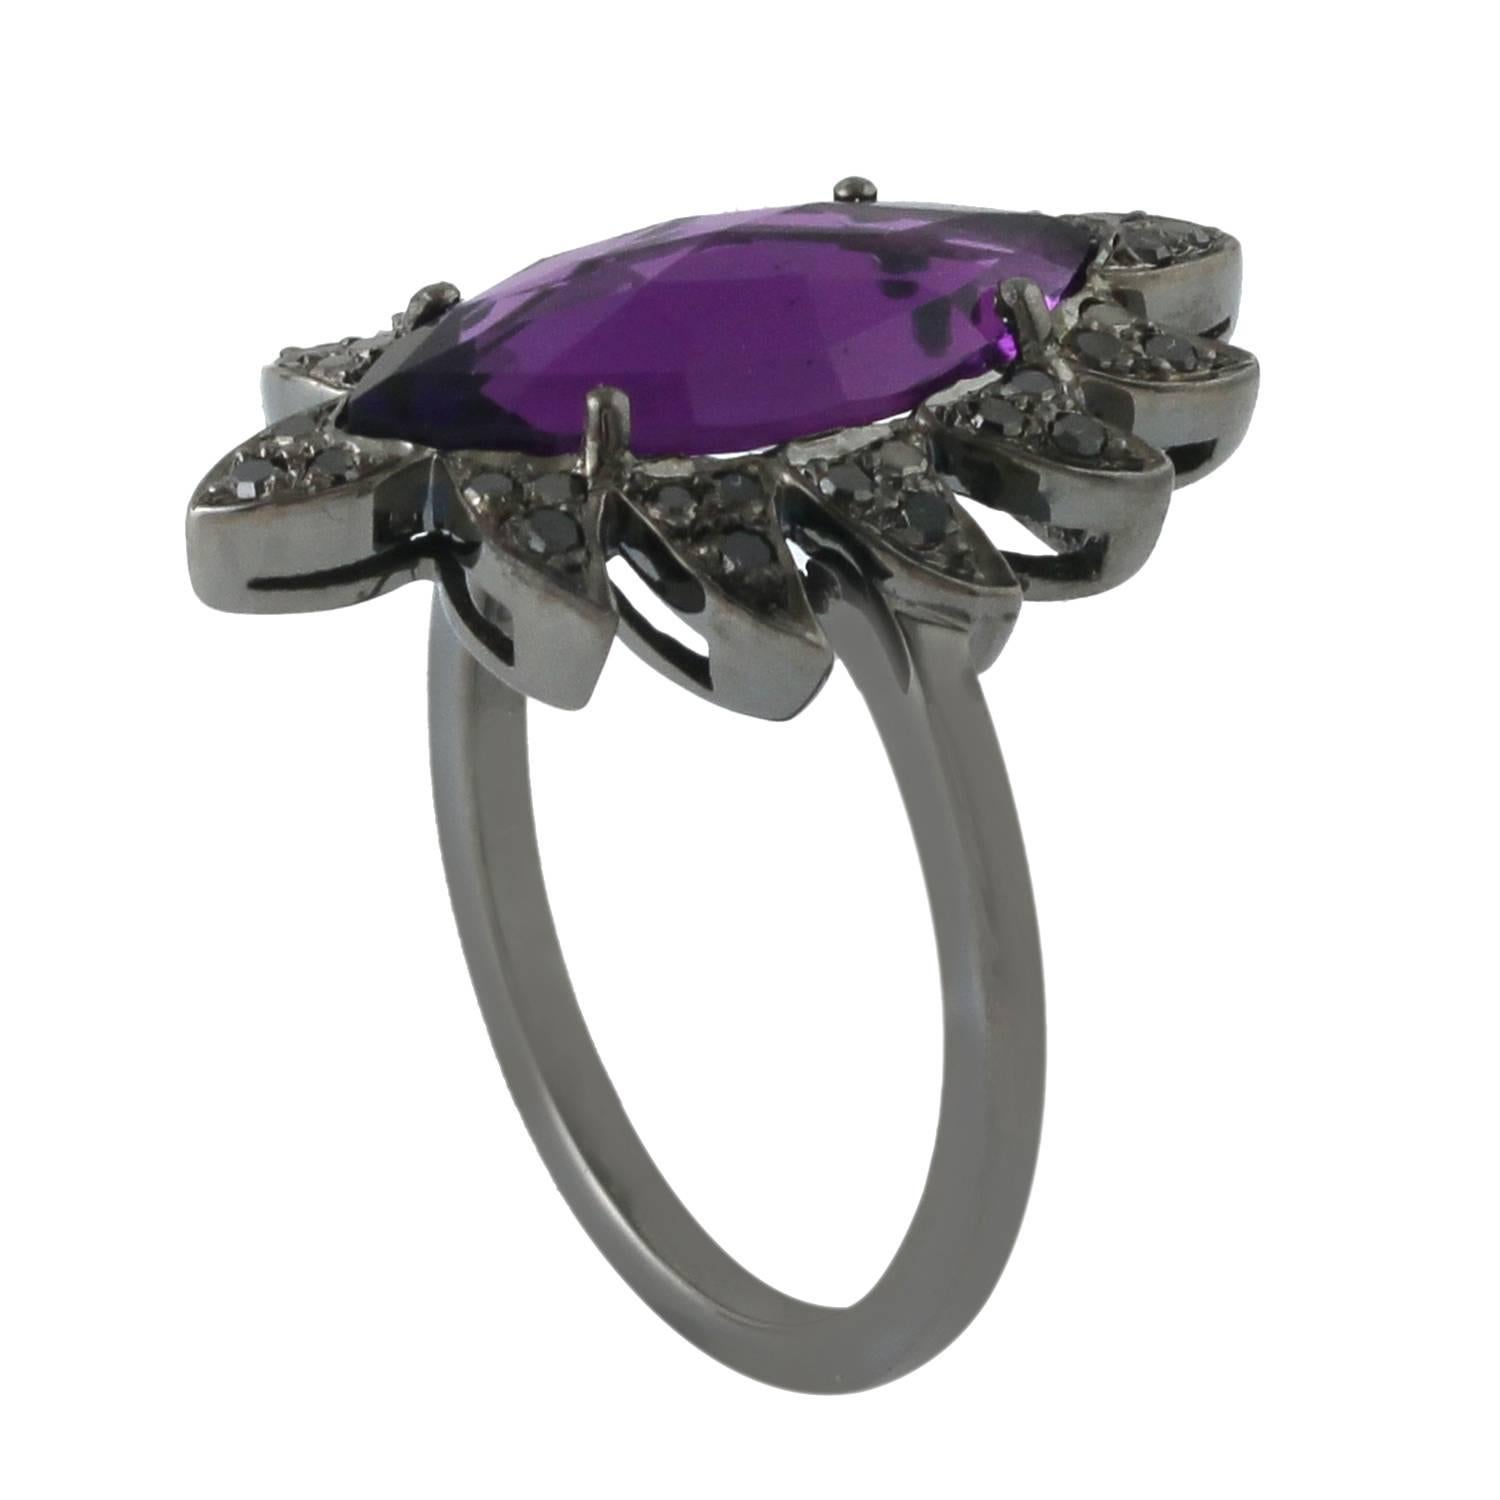 Cast in  18K gold & sterling silver.  This beautiful ring is hand set with 7.54 carat amethyst and 0.71 carat of black diamonds

18K 1.46 grams
Sterling Silver 4.17 grams
Black Diamond 0.71 carat
Amethyst 7.54 carat

FOLLOW  MEGHNA JEWELS storefront